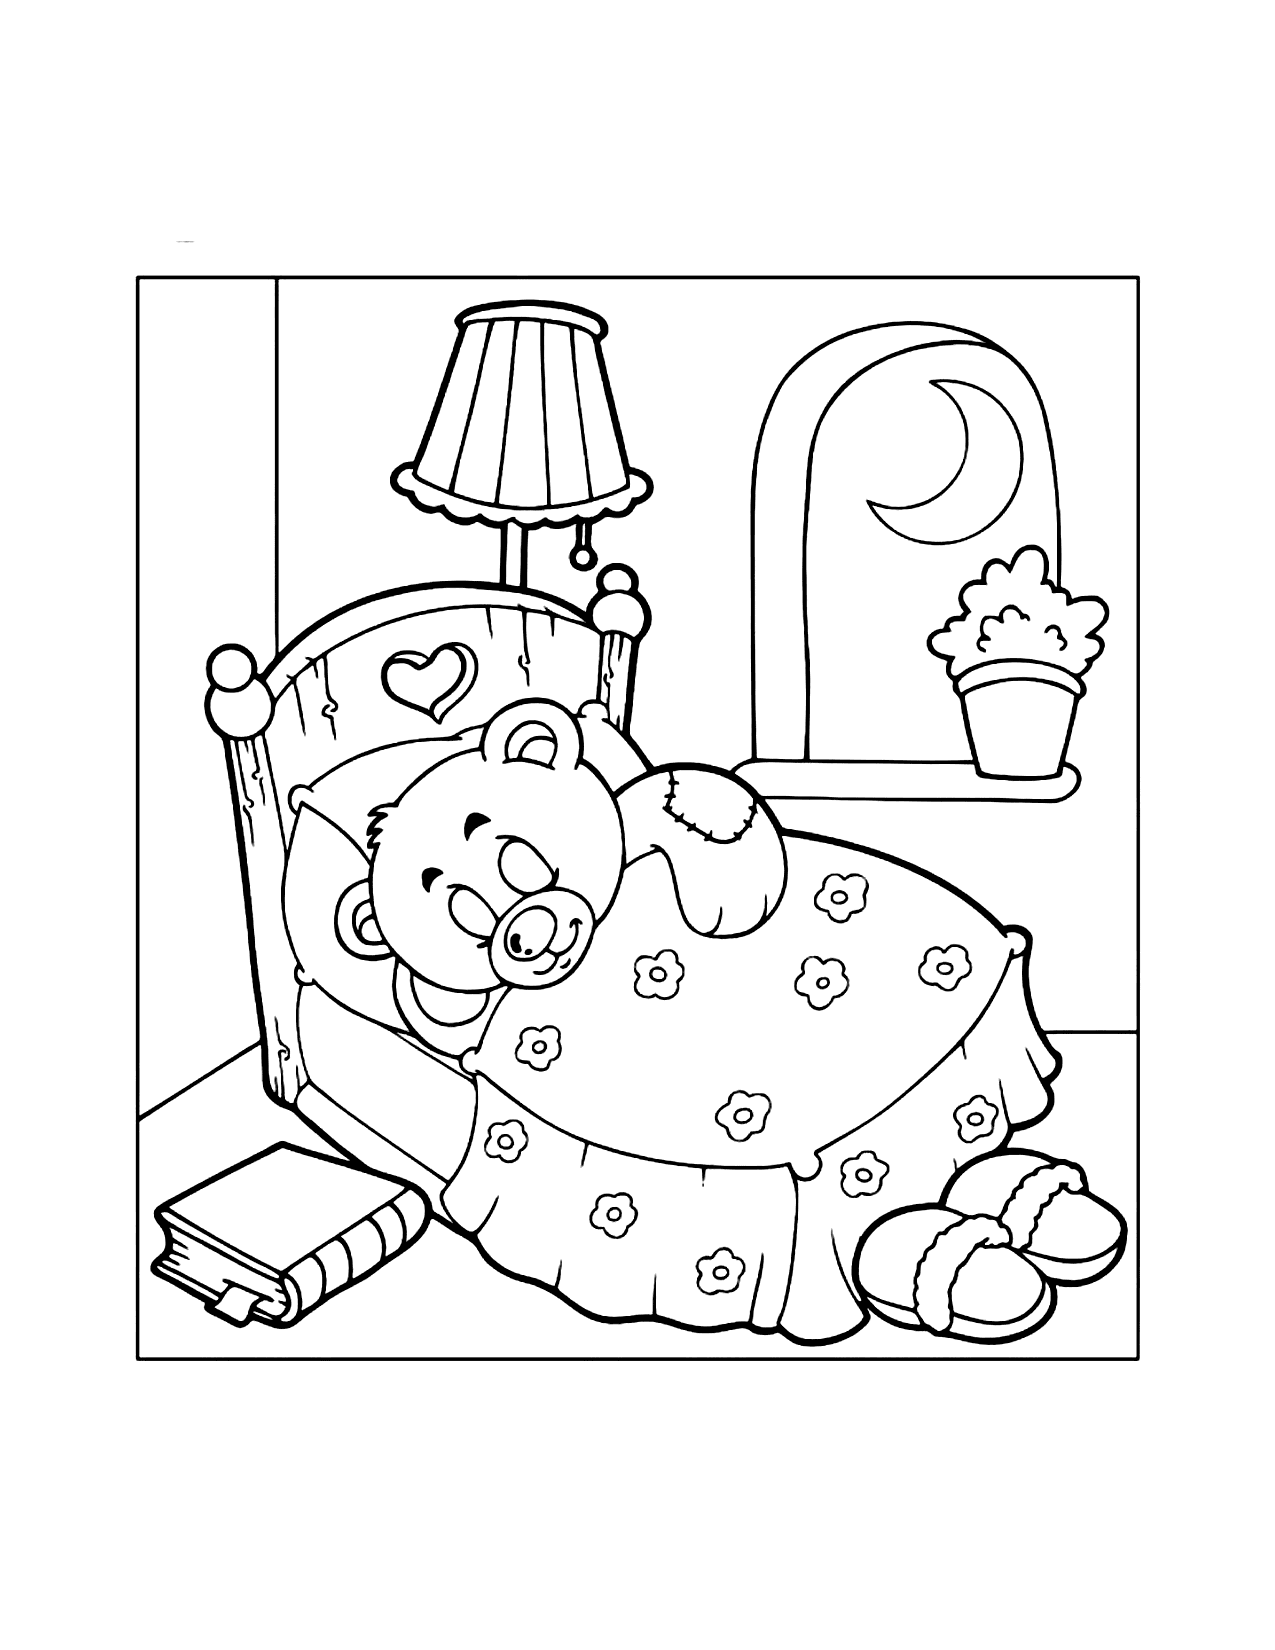 Naptime For Teddy Bear Coloring Page